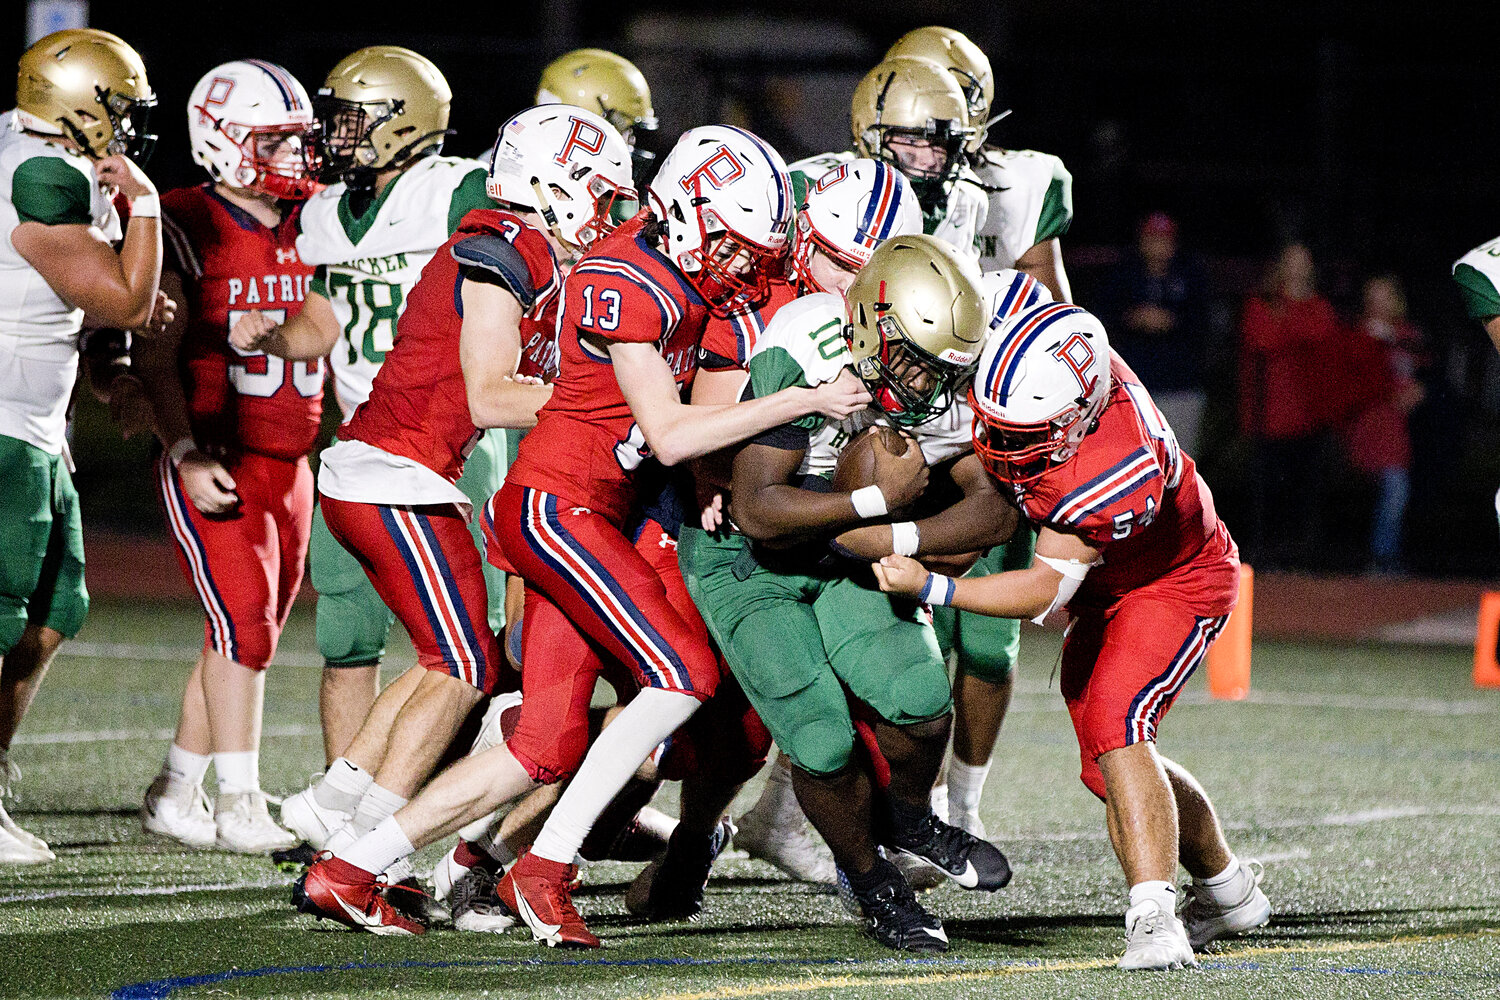 Jack Sanderson (13), Tyler Hurd (middle), and Tristan Conheeny (right), surround a Hendricken ball-carrier.